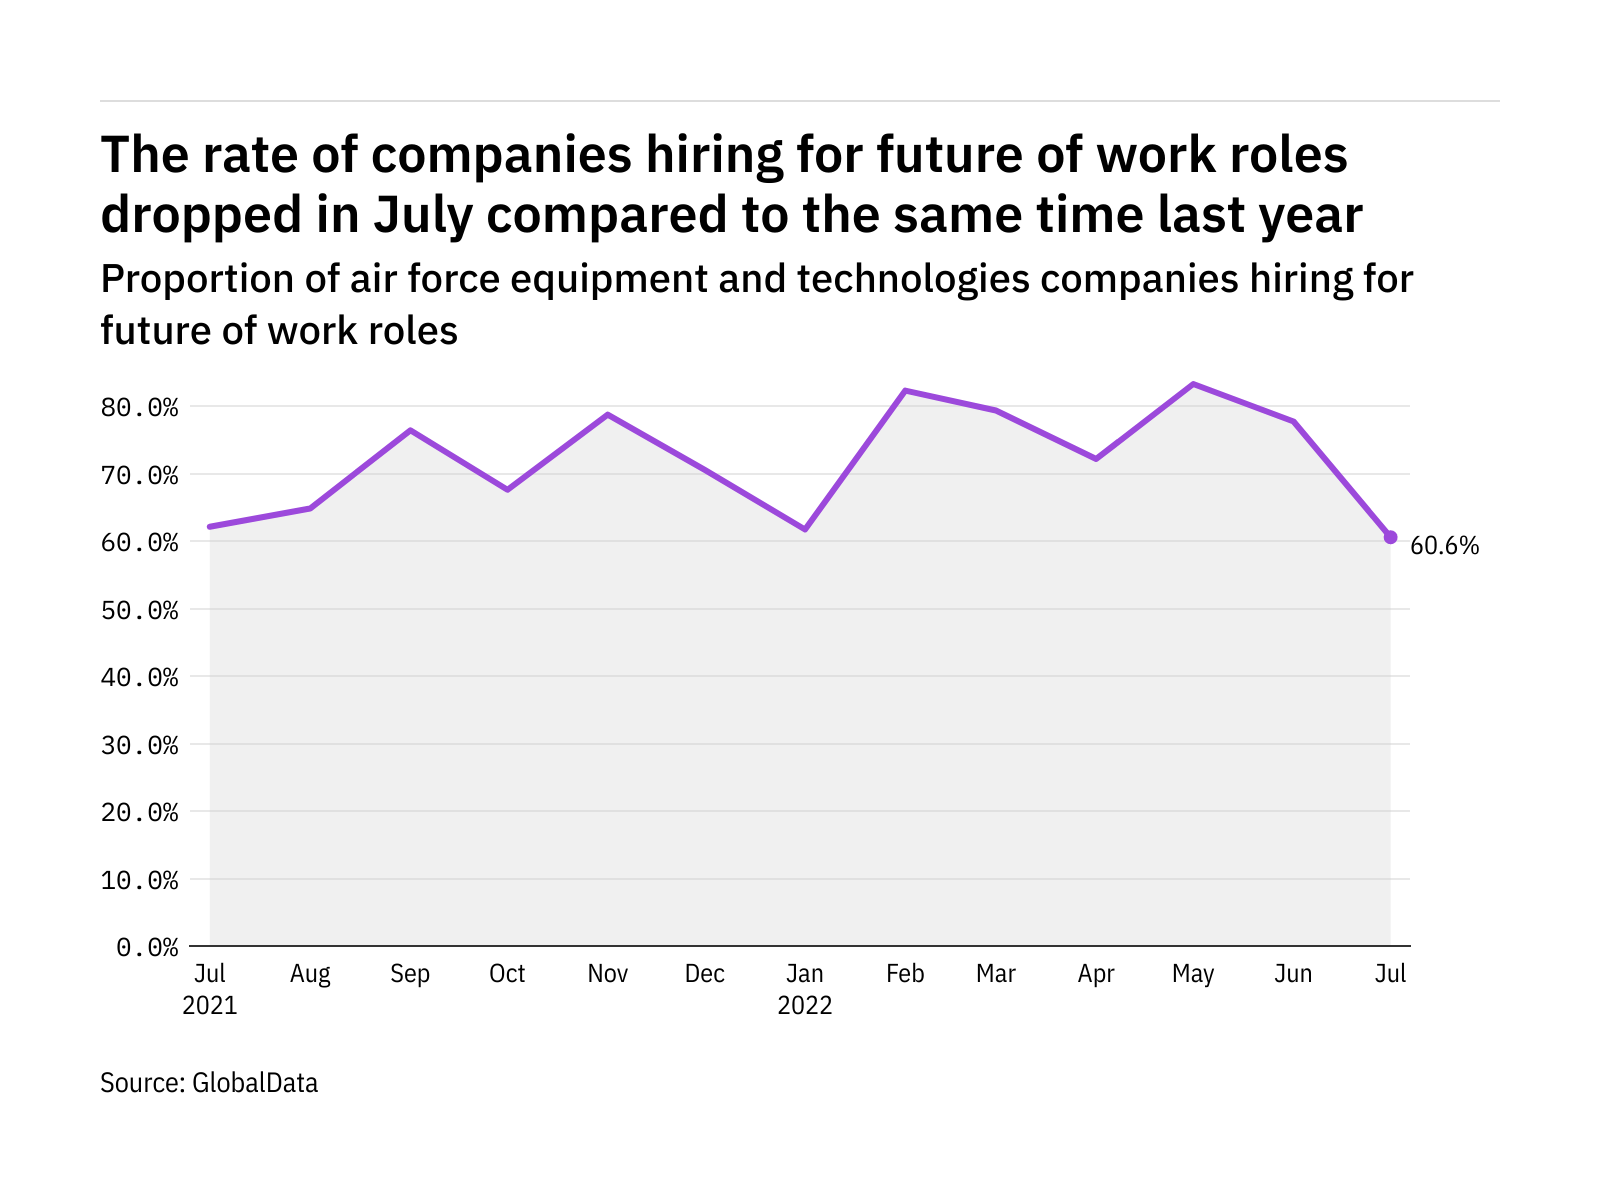 Future of work hiring levels in the air force industry fell to a year-low in July 2022